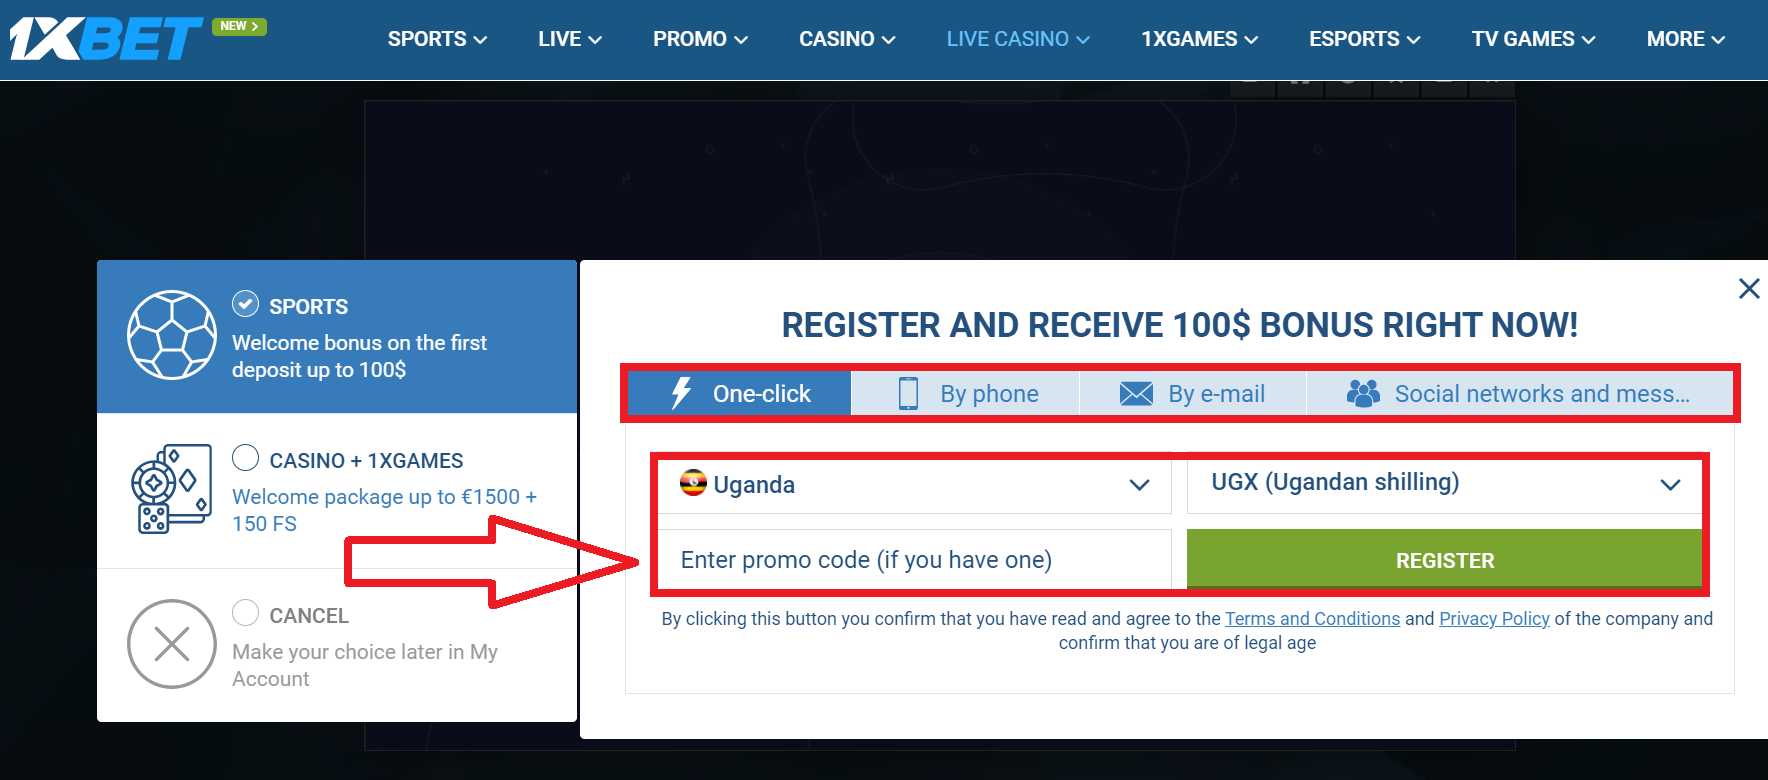 Username and password for 1xBet login